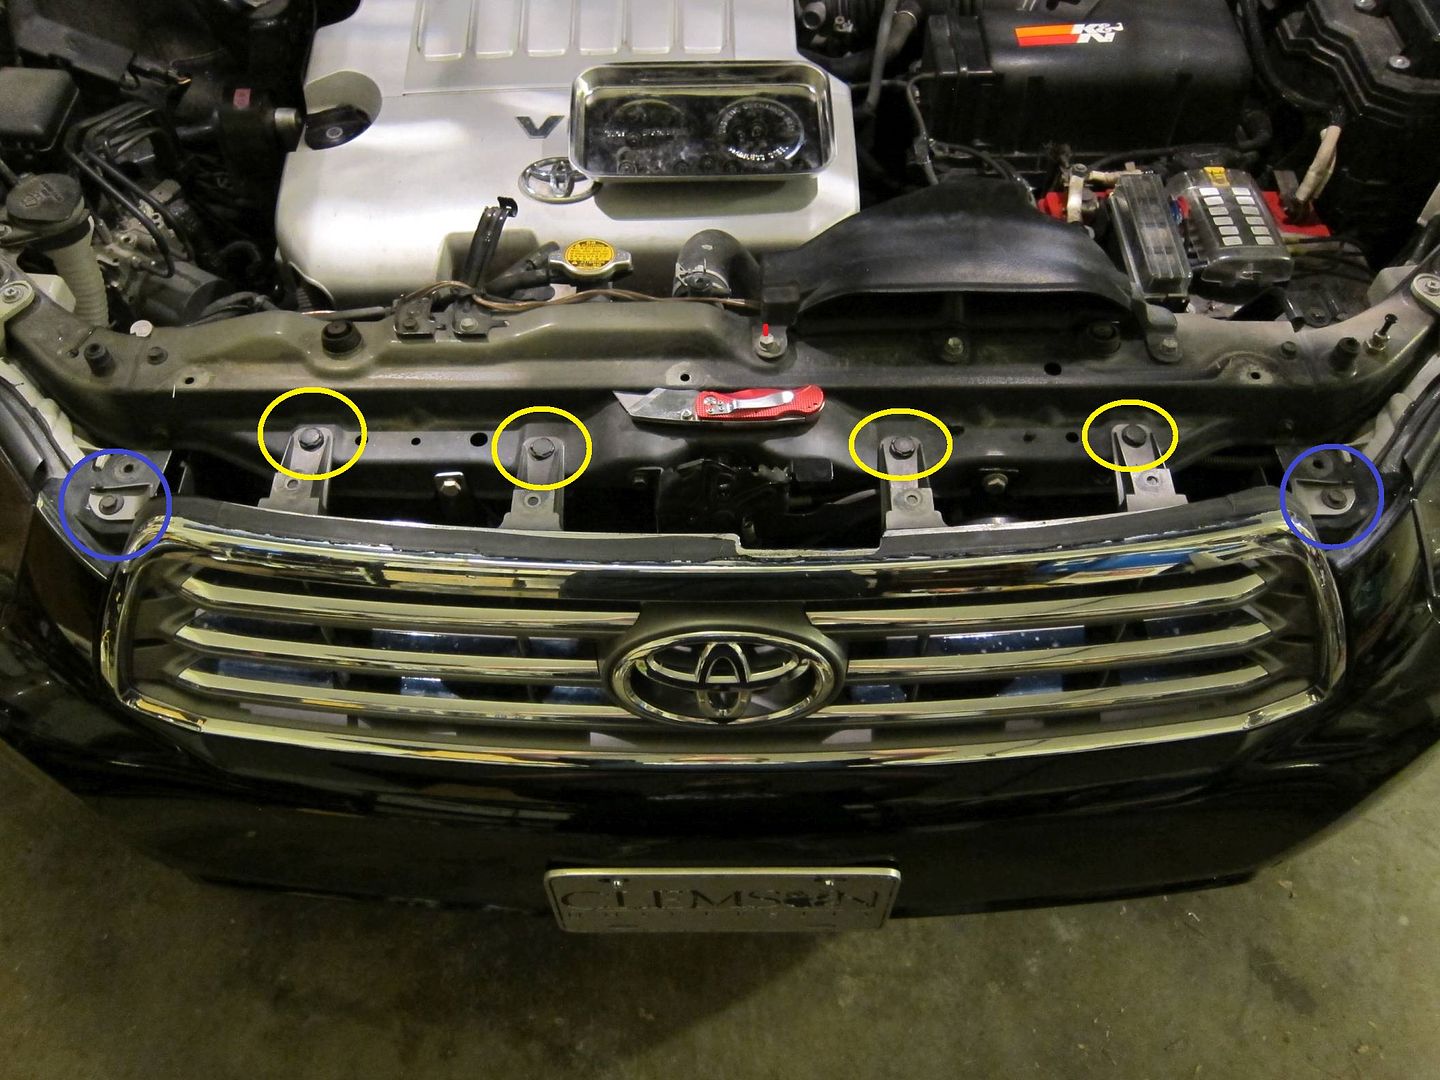 2011 prius headlight assembly removal